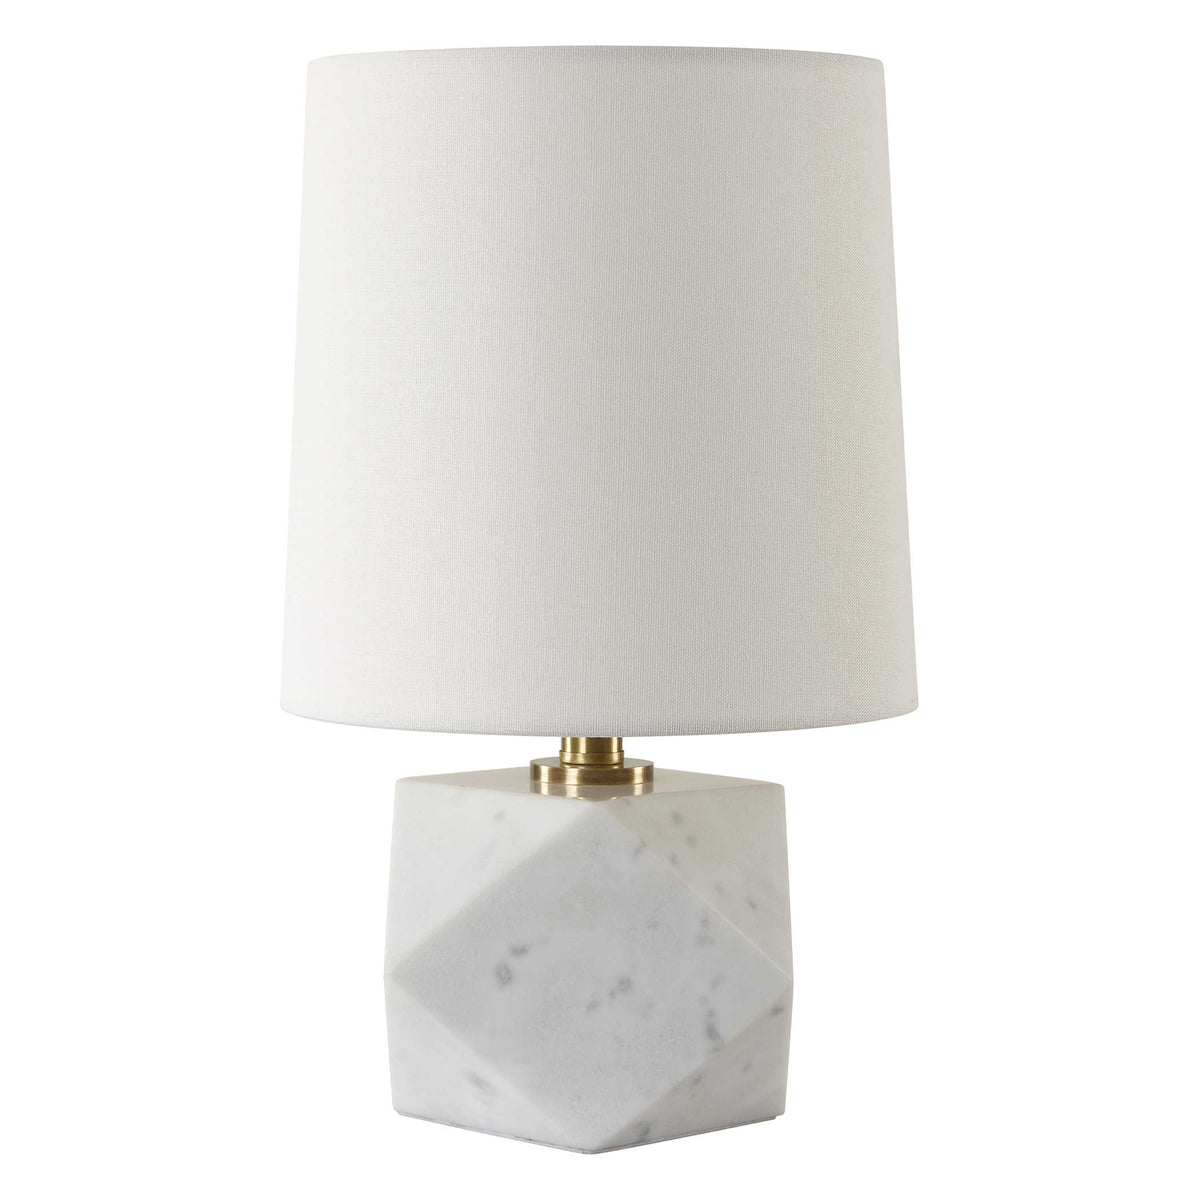 Uttermost - 30415-1 - One Light Table Lamp - A Cut Above - Antique Brass